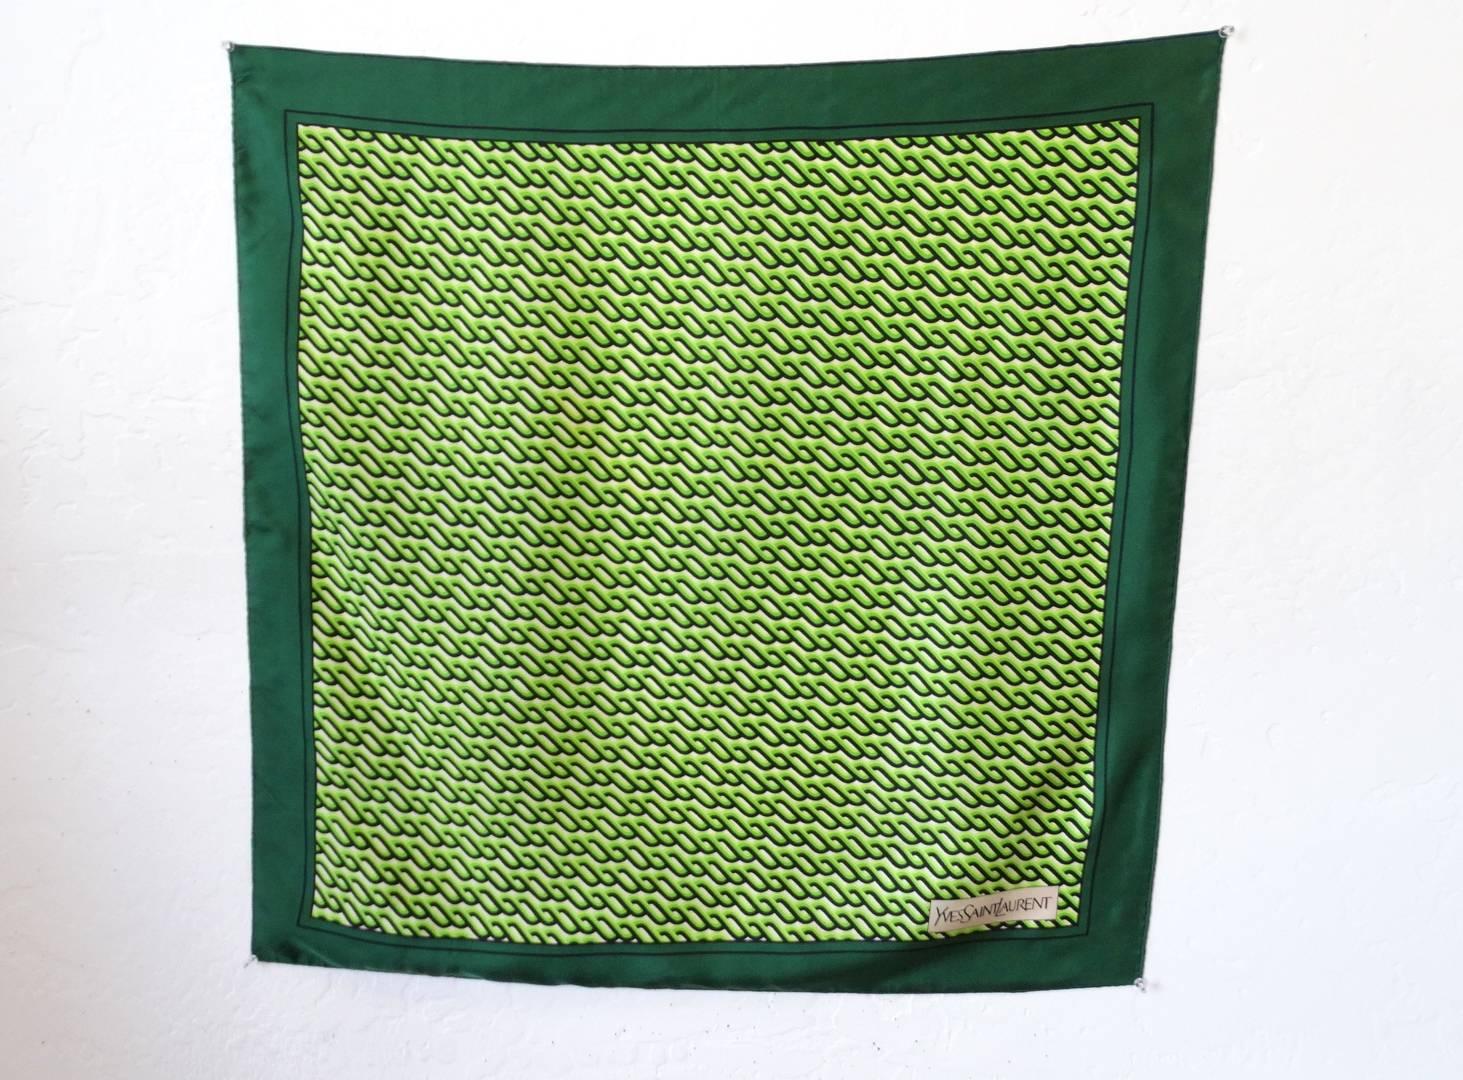 Rock the spirit of the 1970s with our amazing green patterned scarf from the iconic Yves Saint Laurent. Silk square scarf printed with a beautiful contrasting green braid inspired pattern, solid green border all around the edges. Yves Saint Laurent